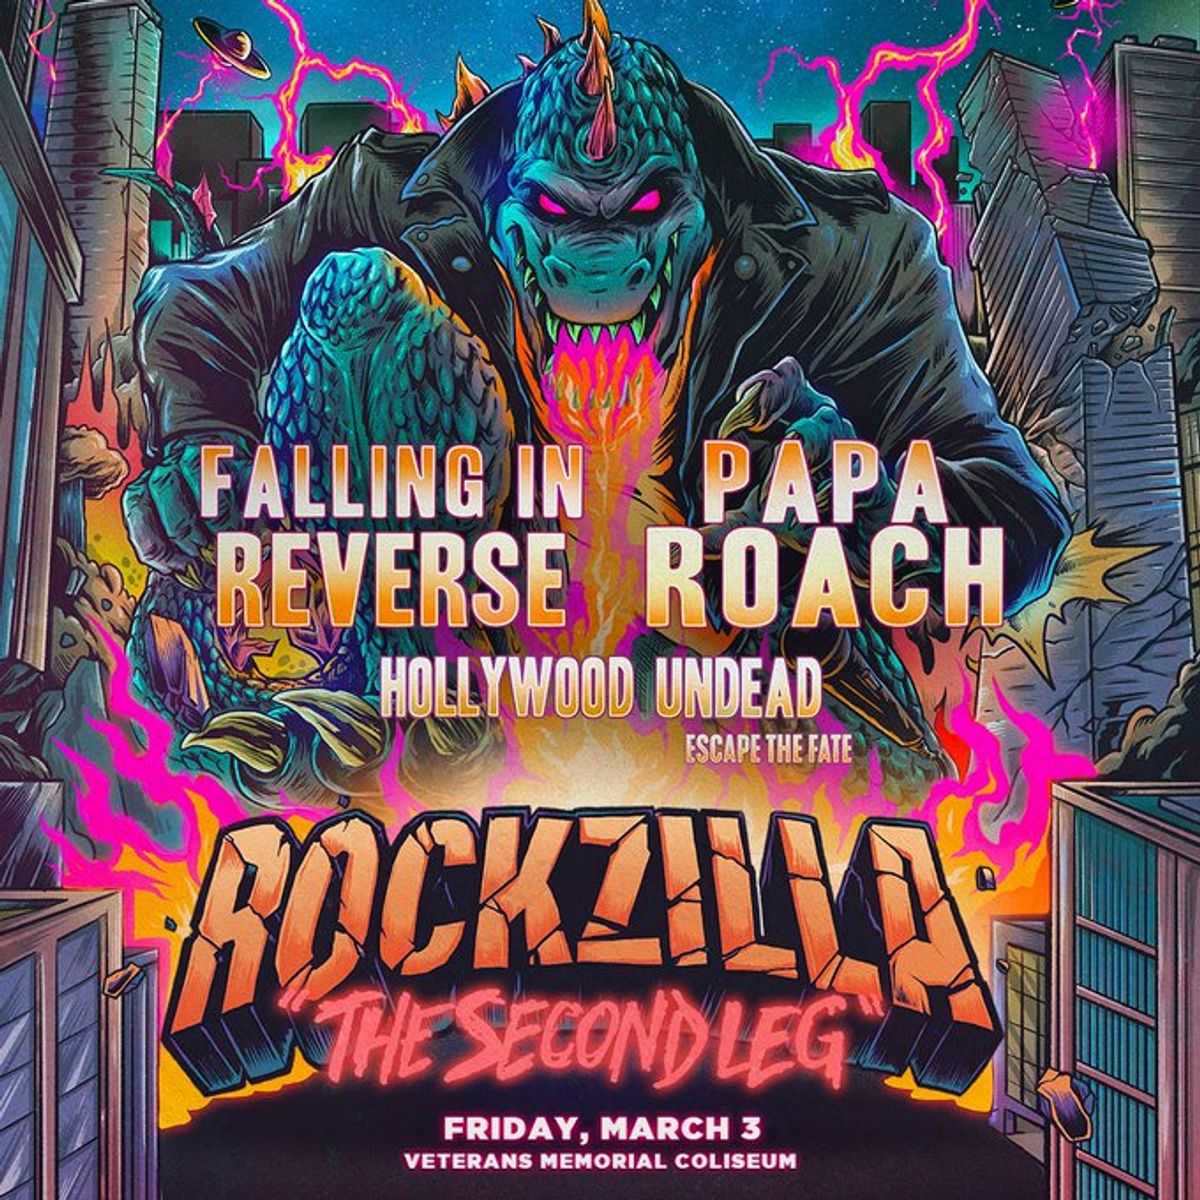 Rockzilla Falling in Reverse, Papa Roach, Hollywood Undead, and Escape